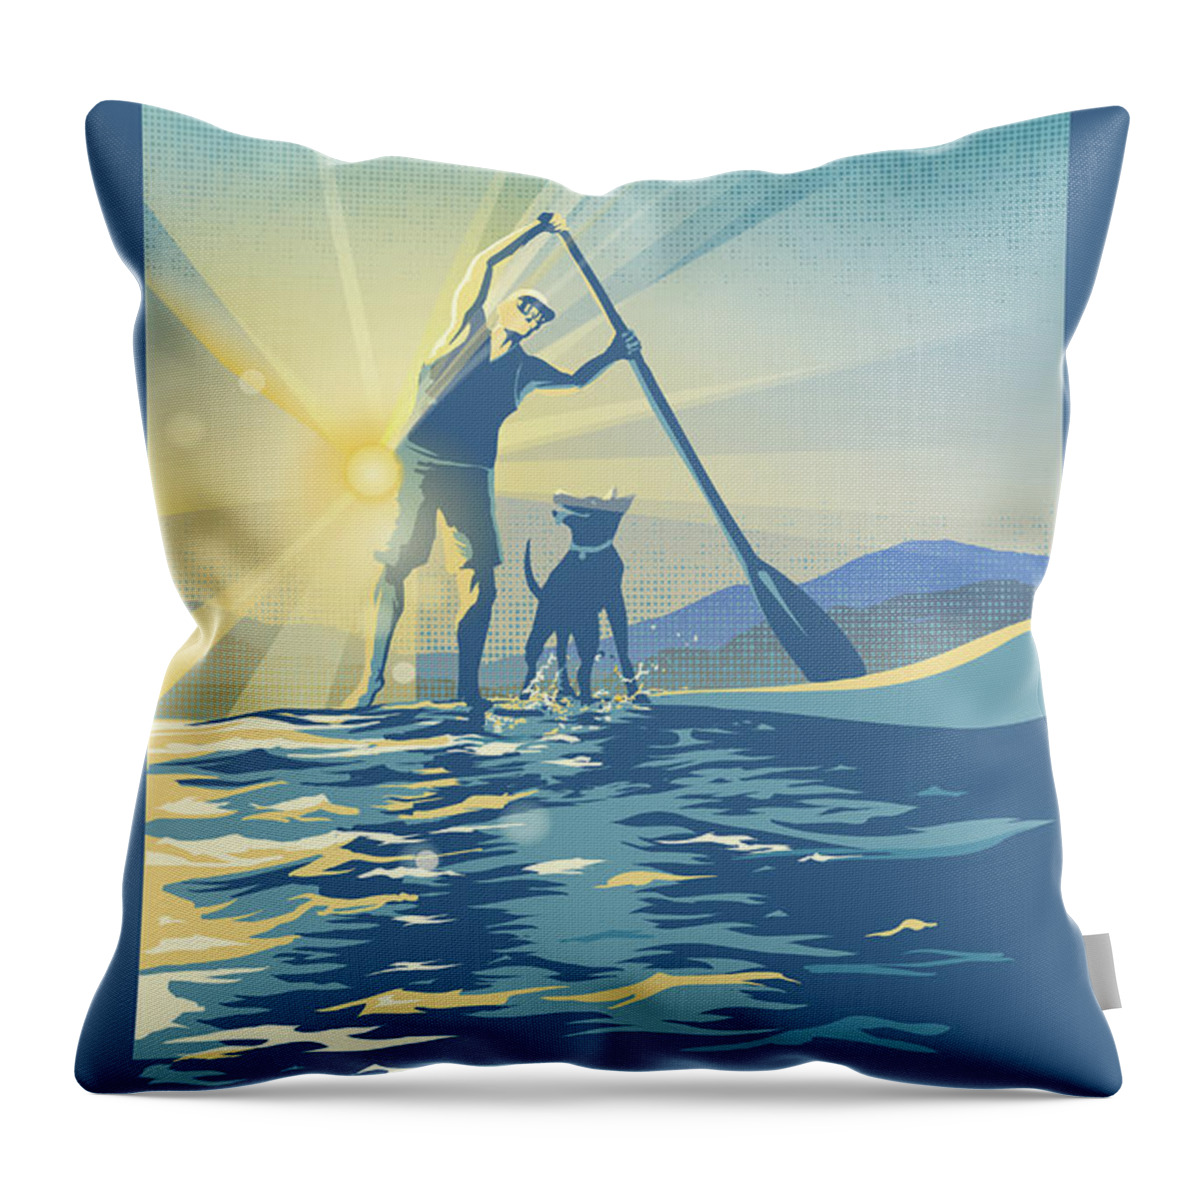 Paddle Boarding Throw Pillow featuring the digital art Sunrise Paddle Boarder by Sassan Filsoof